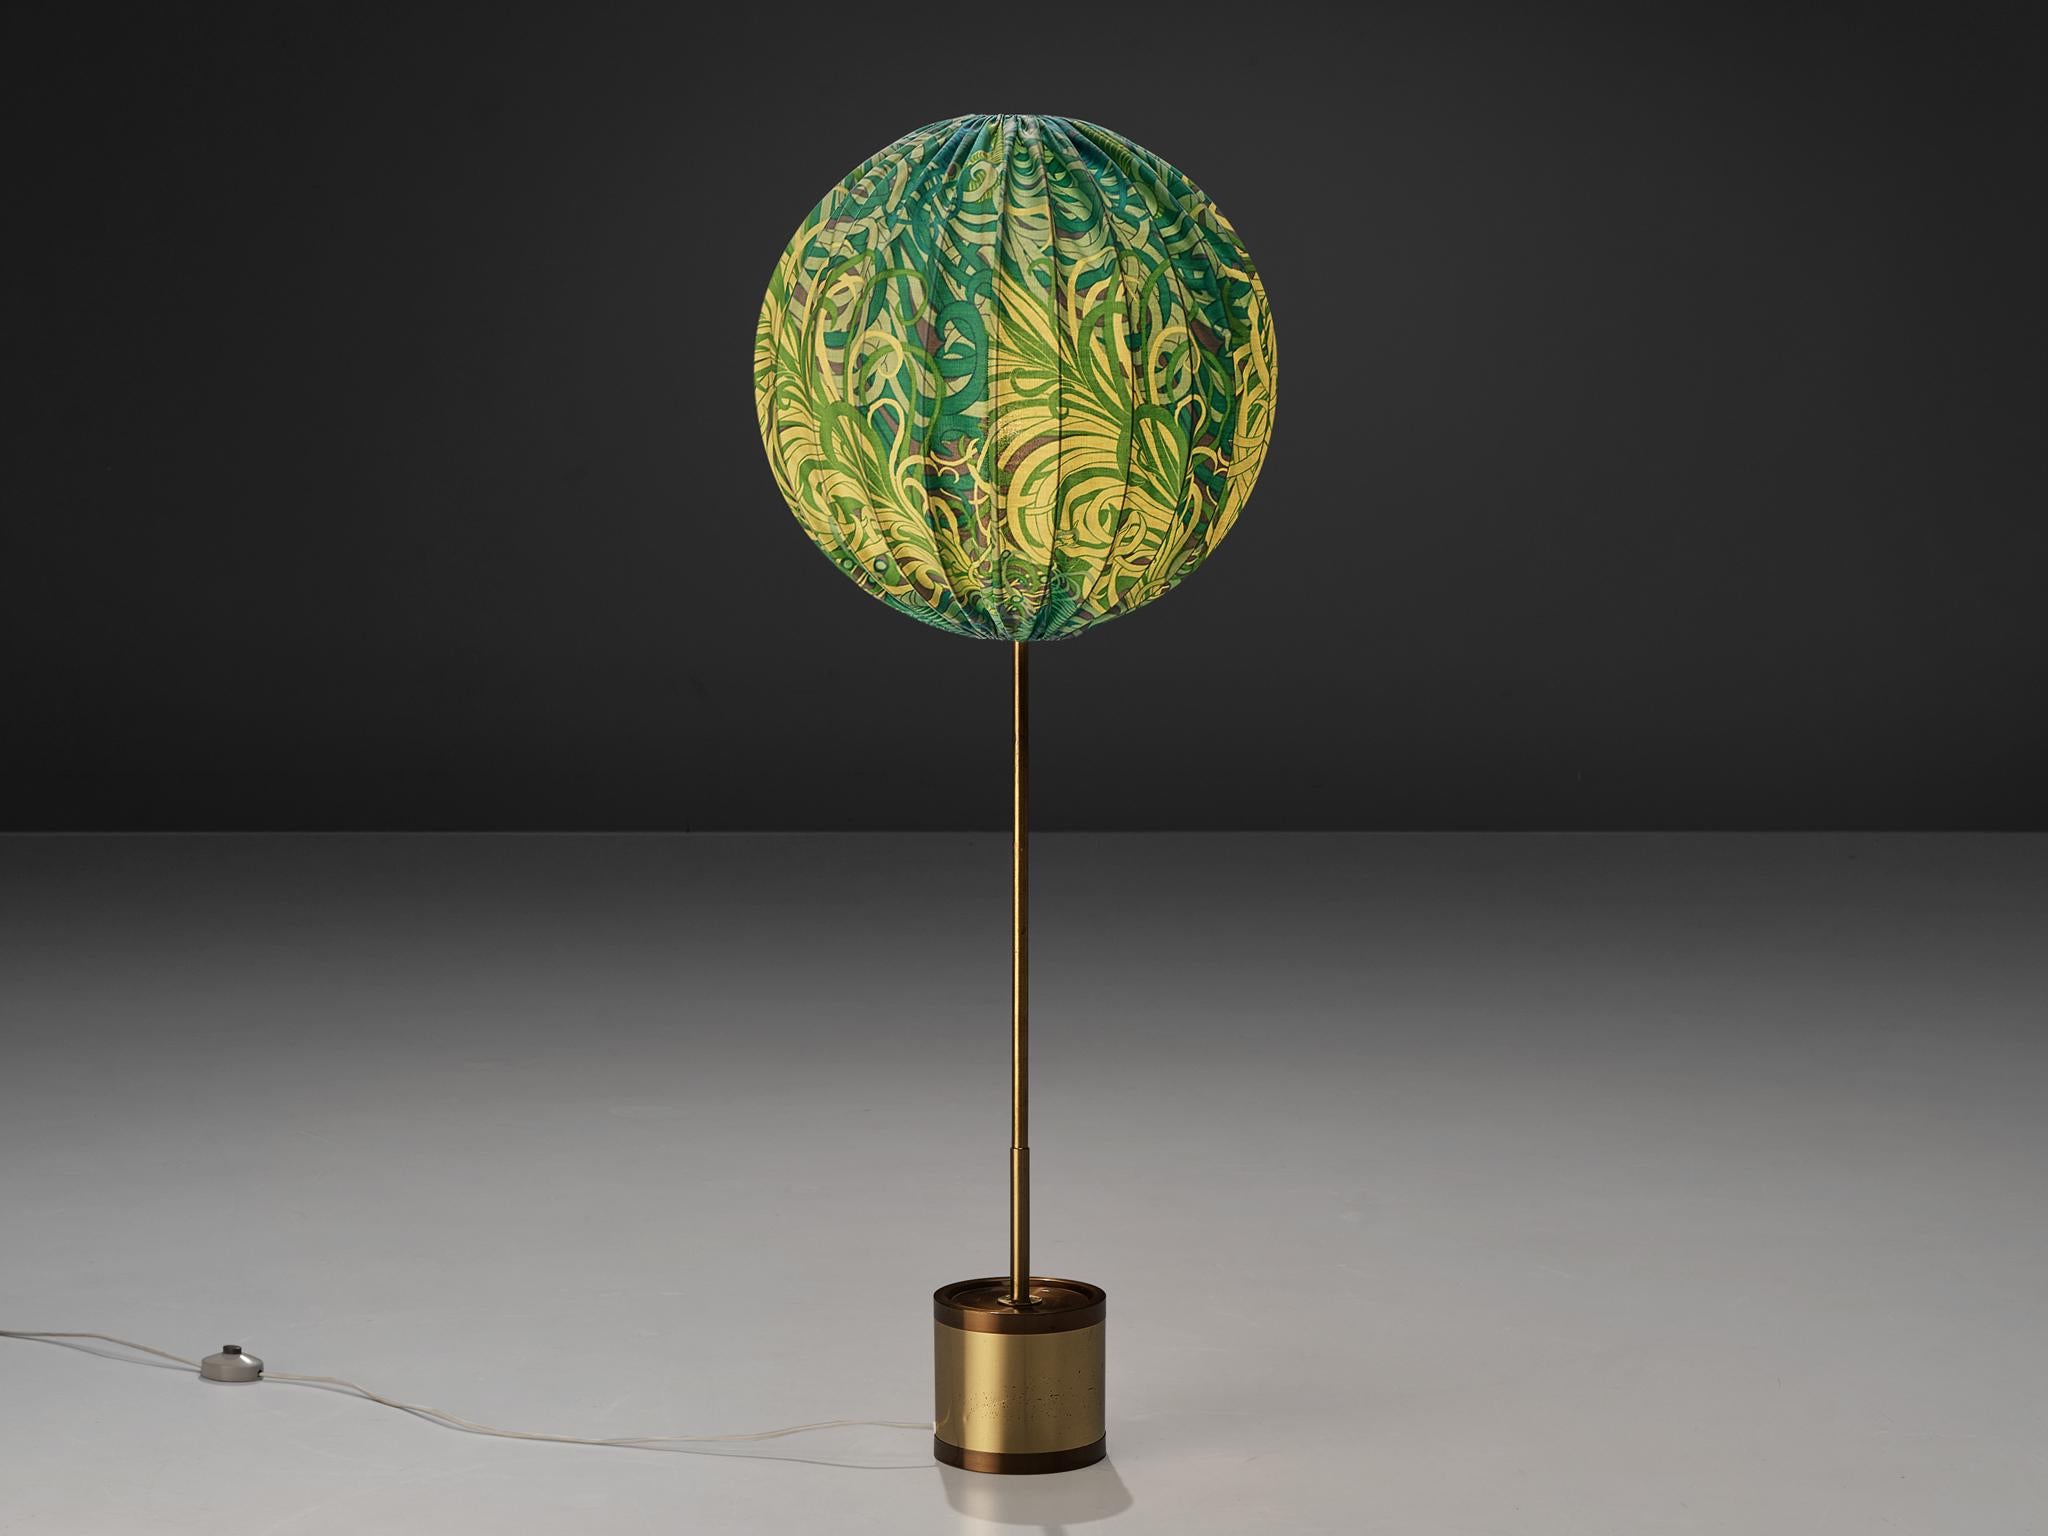 Hans-Agne Jakobsson, floor lamp model G123, brass, metal, fabric, Denmark, 1960s

This playful 'Balloon' lamp was design by Jakobsson in the 1960s. The circular lampshade catches the eye. A floral patterned fabric in blue and green is fixed above